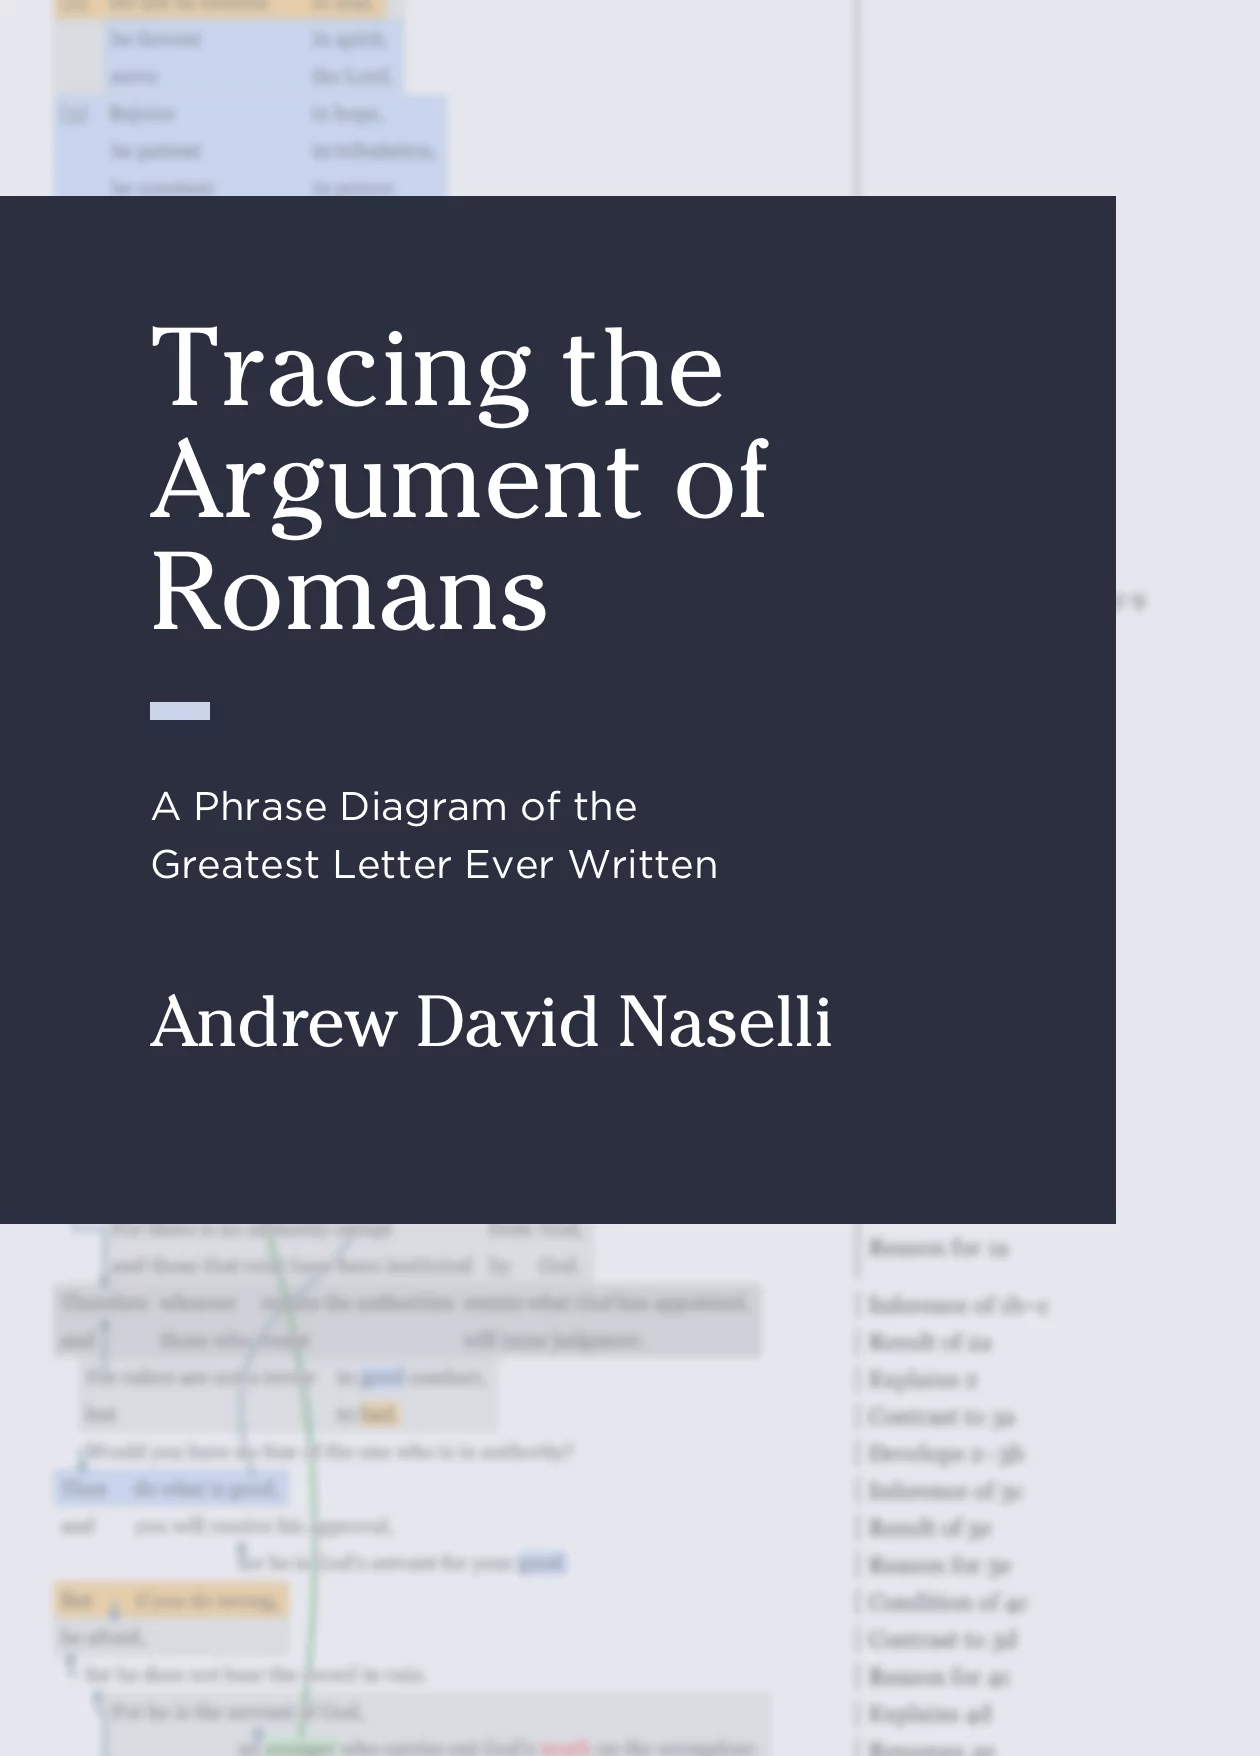 Tracing the Argument of Romans: A Phrase Diagram of the Greatest Letter Ever Written